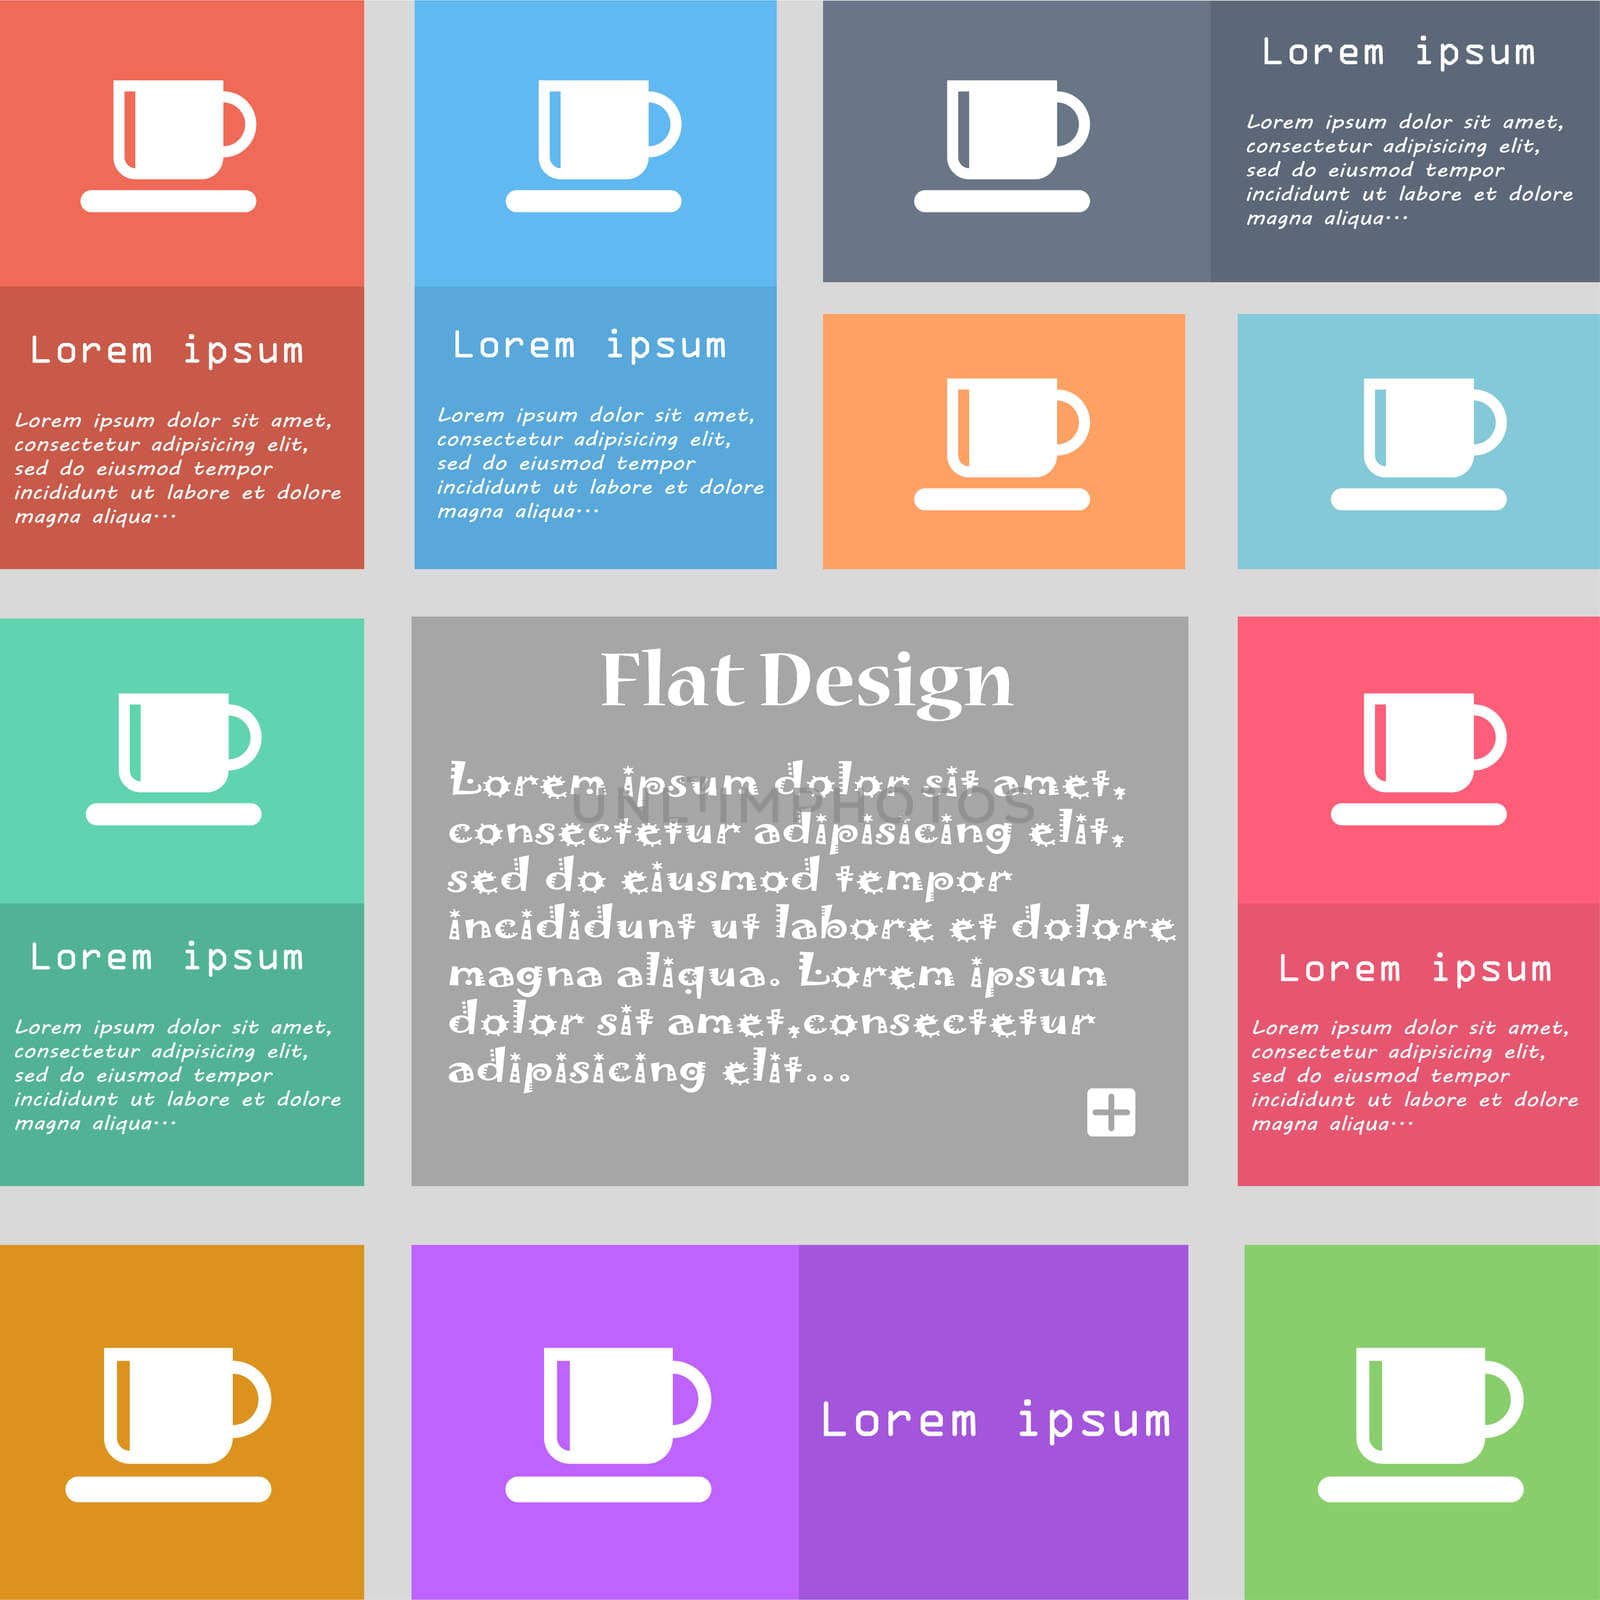 Coffee cup icon sign. Set of multicolored buttons. Metro style with space for text. The Long Shadow illustration